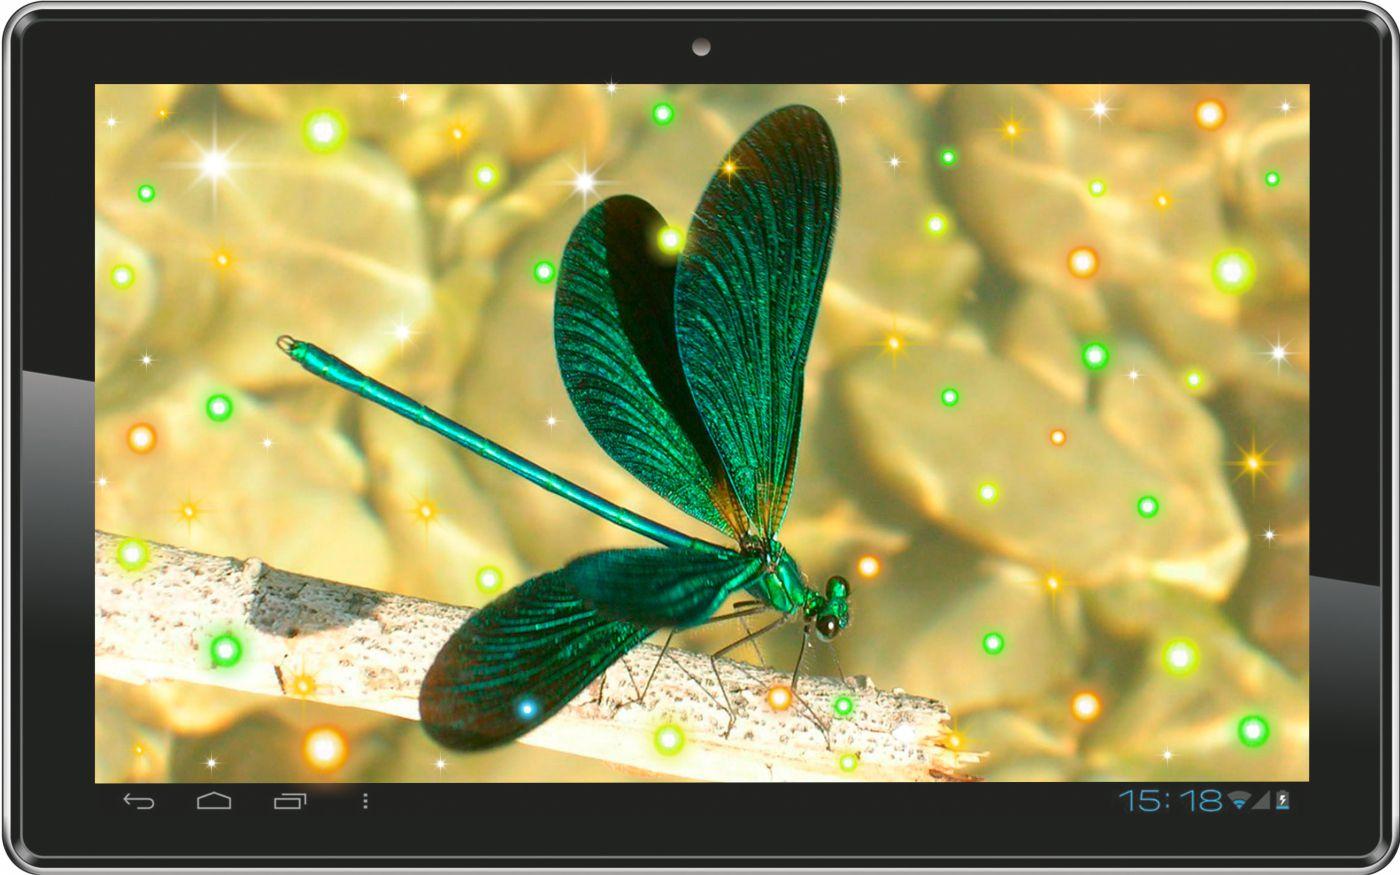 Dragonfly Live Wallpaper Android Apps On Google Play